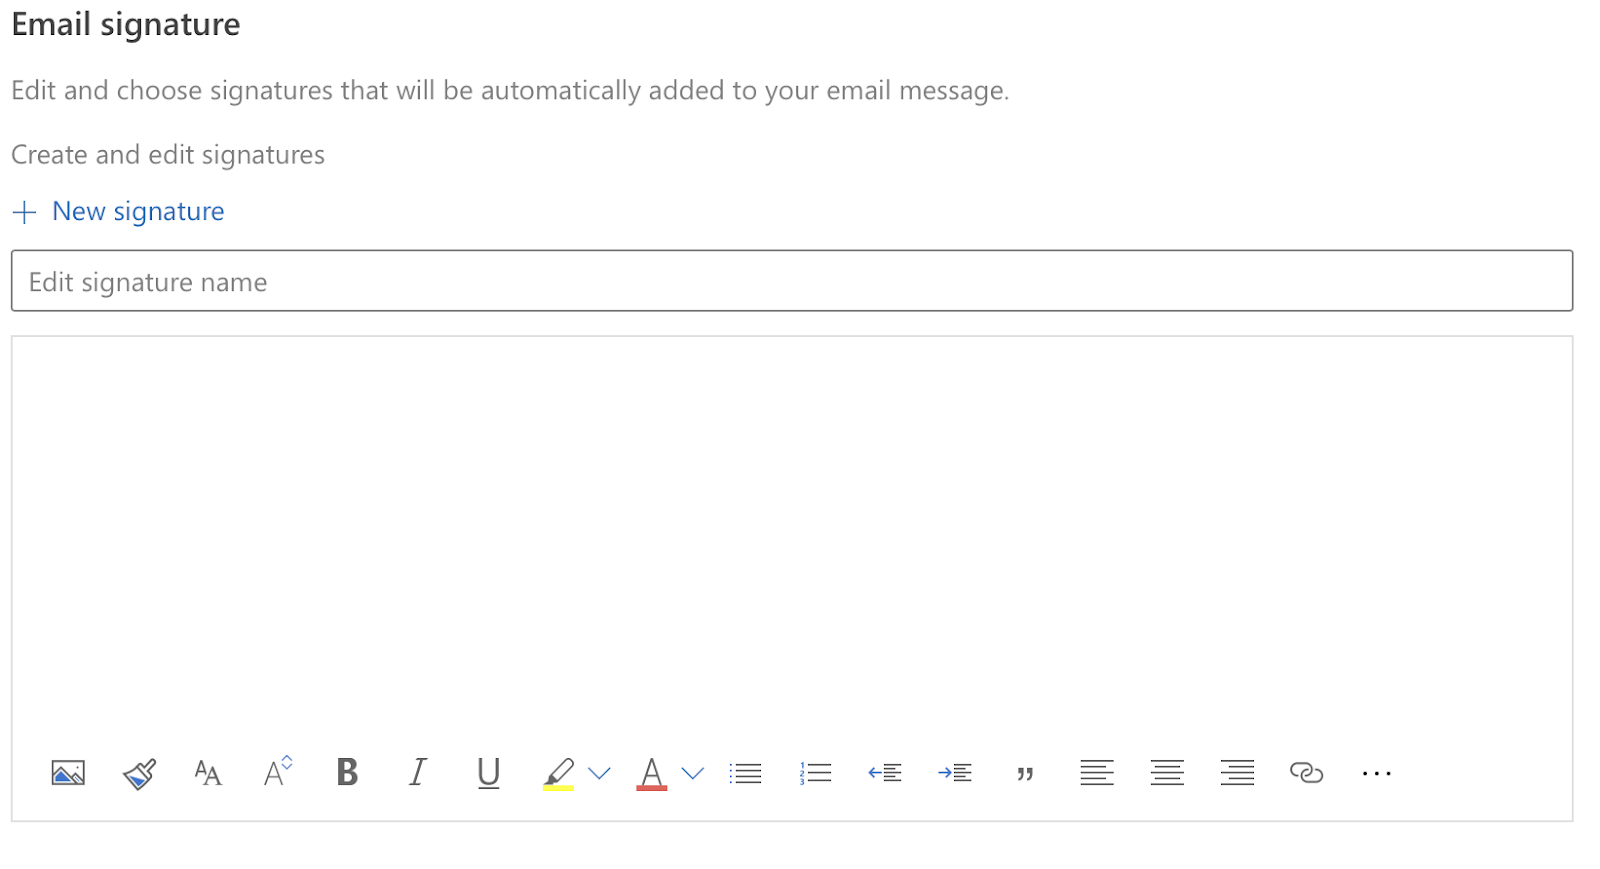 Email signature box in Outlook - blog on how to create a signature in Outlook 